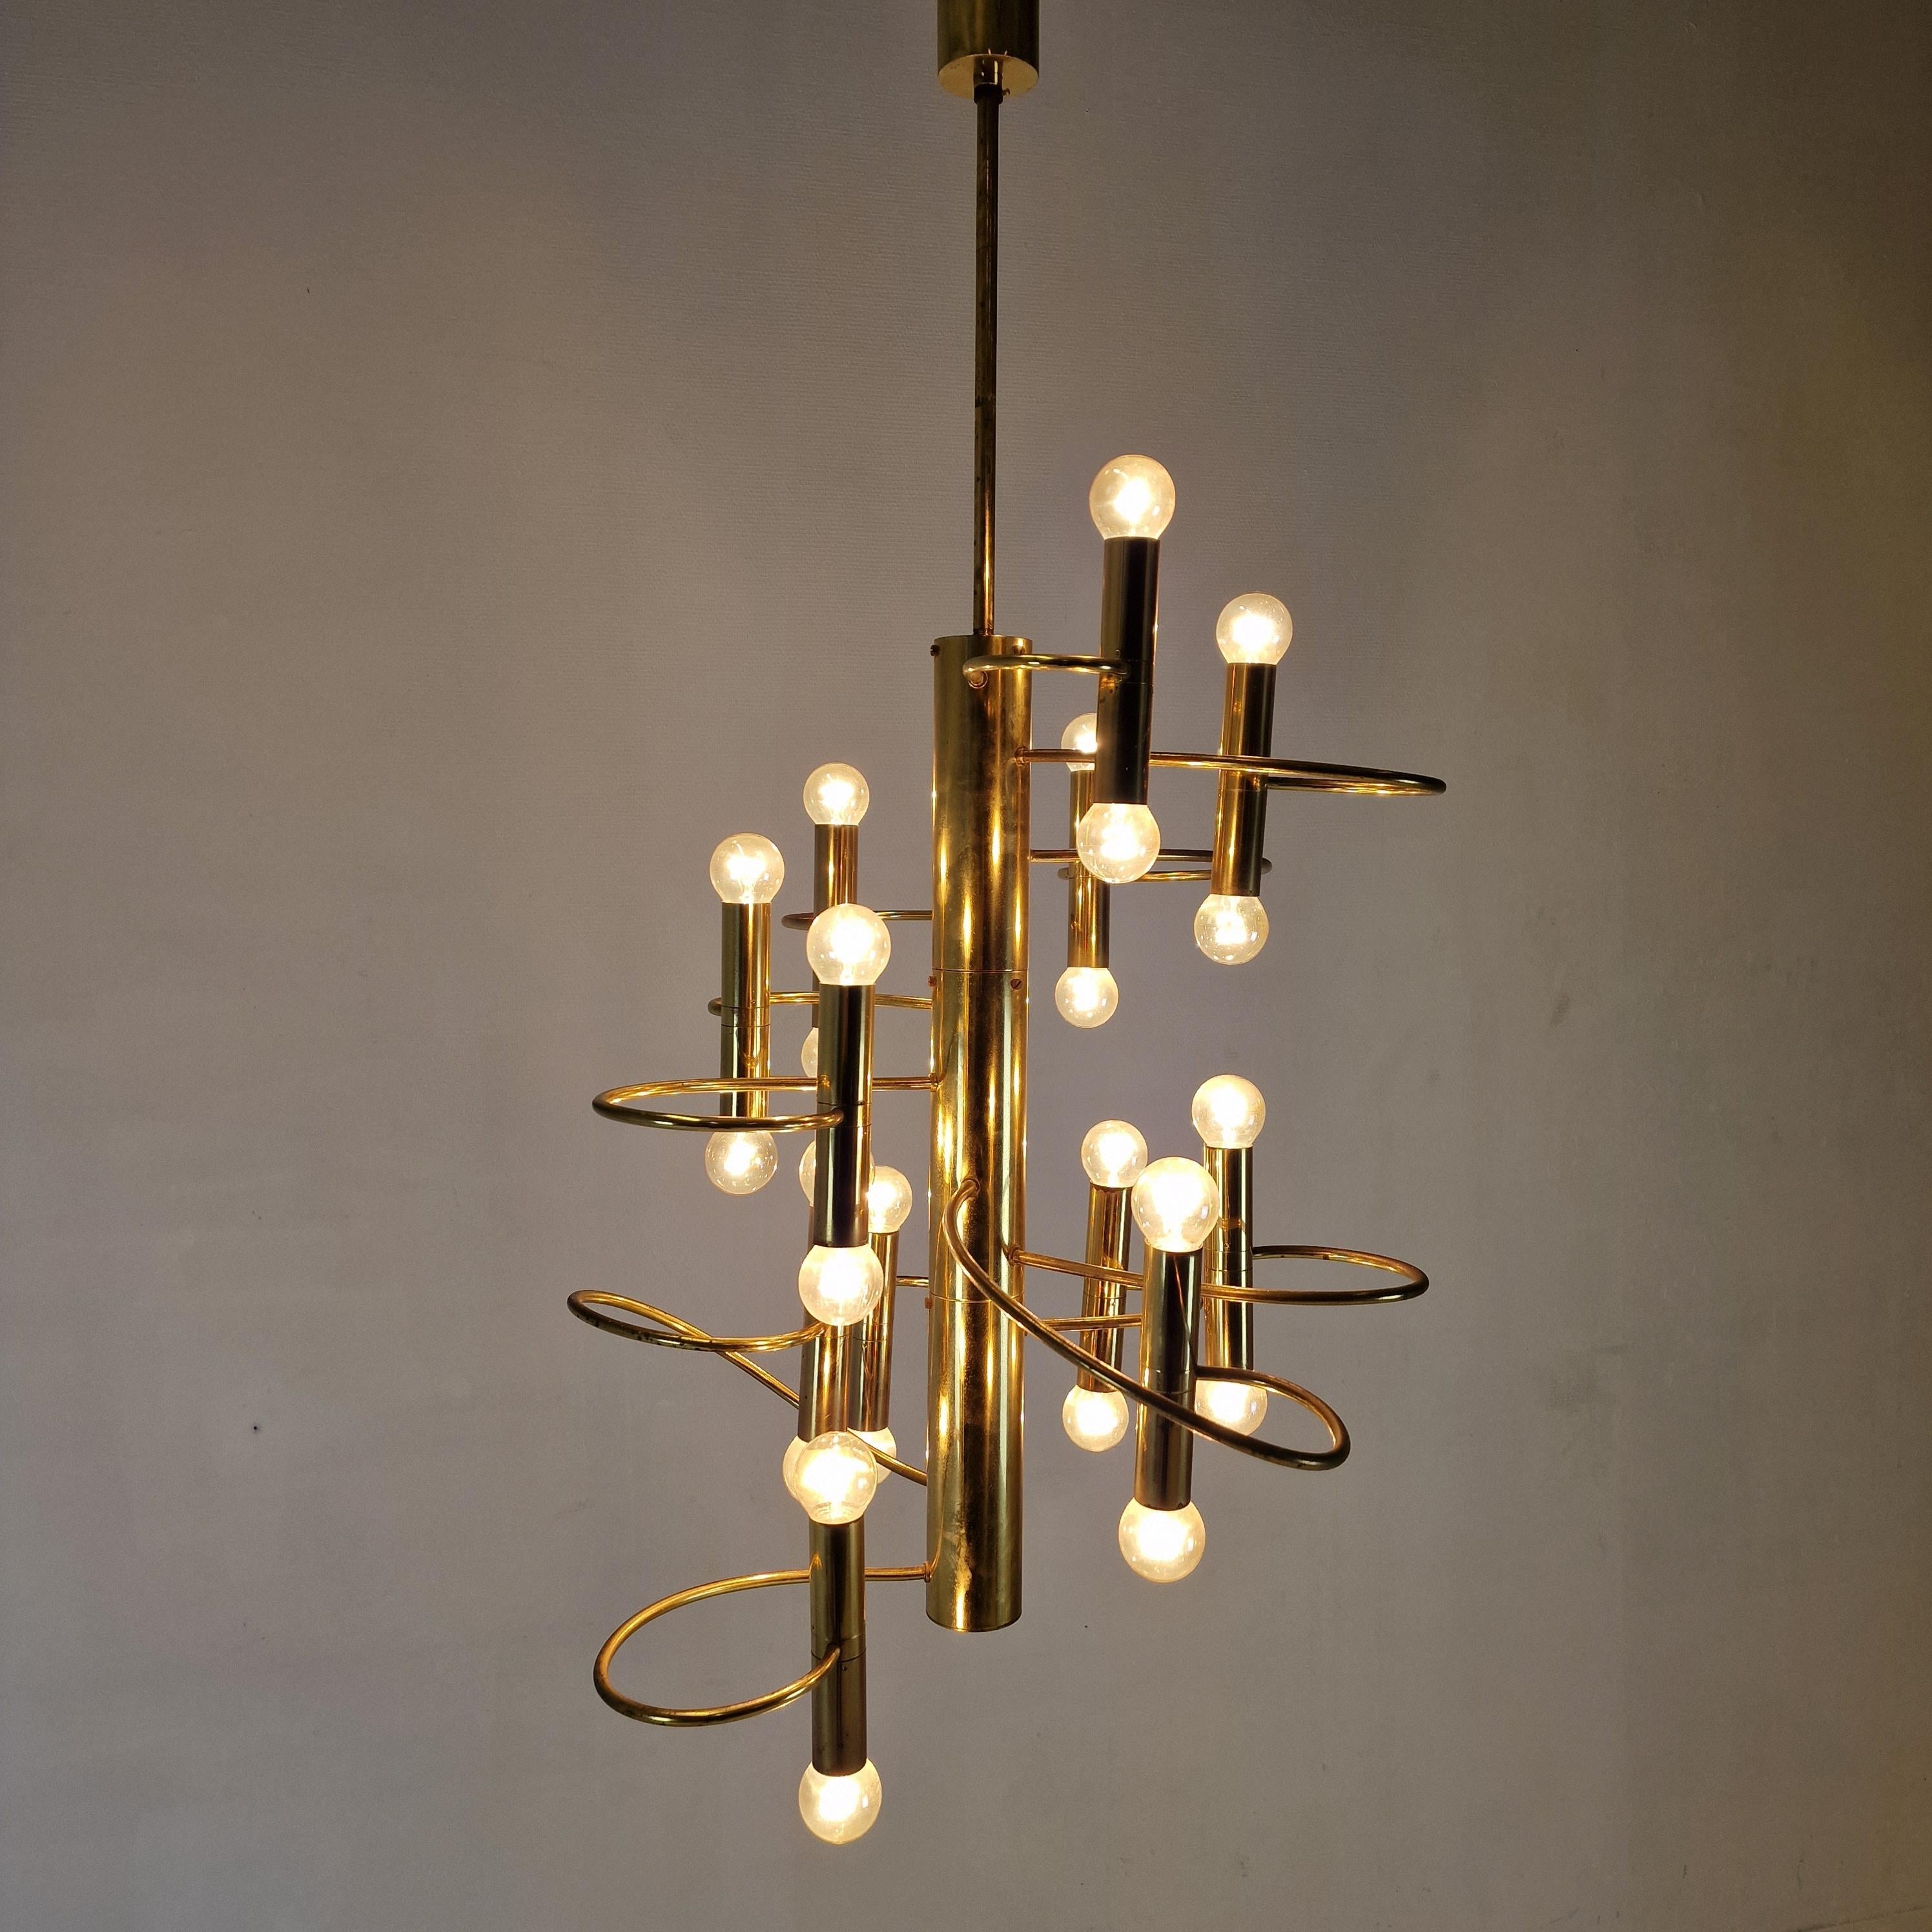 Beautiful Italian pendant fabricated by Sciolari in the 1970s.
The price is for one, there are two available.

The eighteen lights combined with the elegant brass arms makes this lamp a stunning piece.

Good vintage condition, some traces of use. 